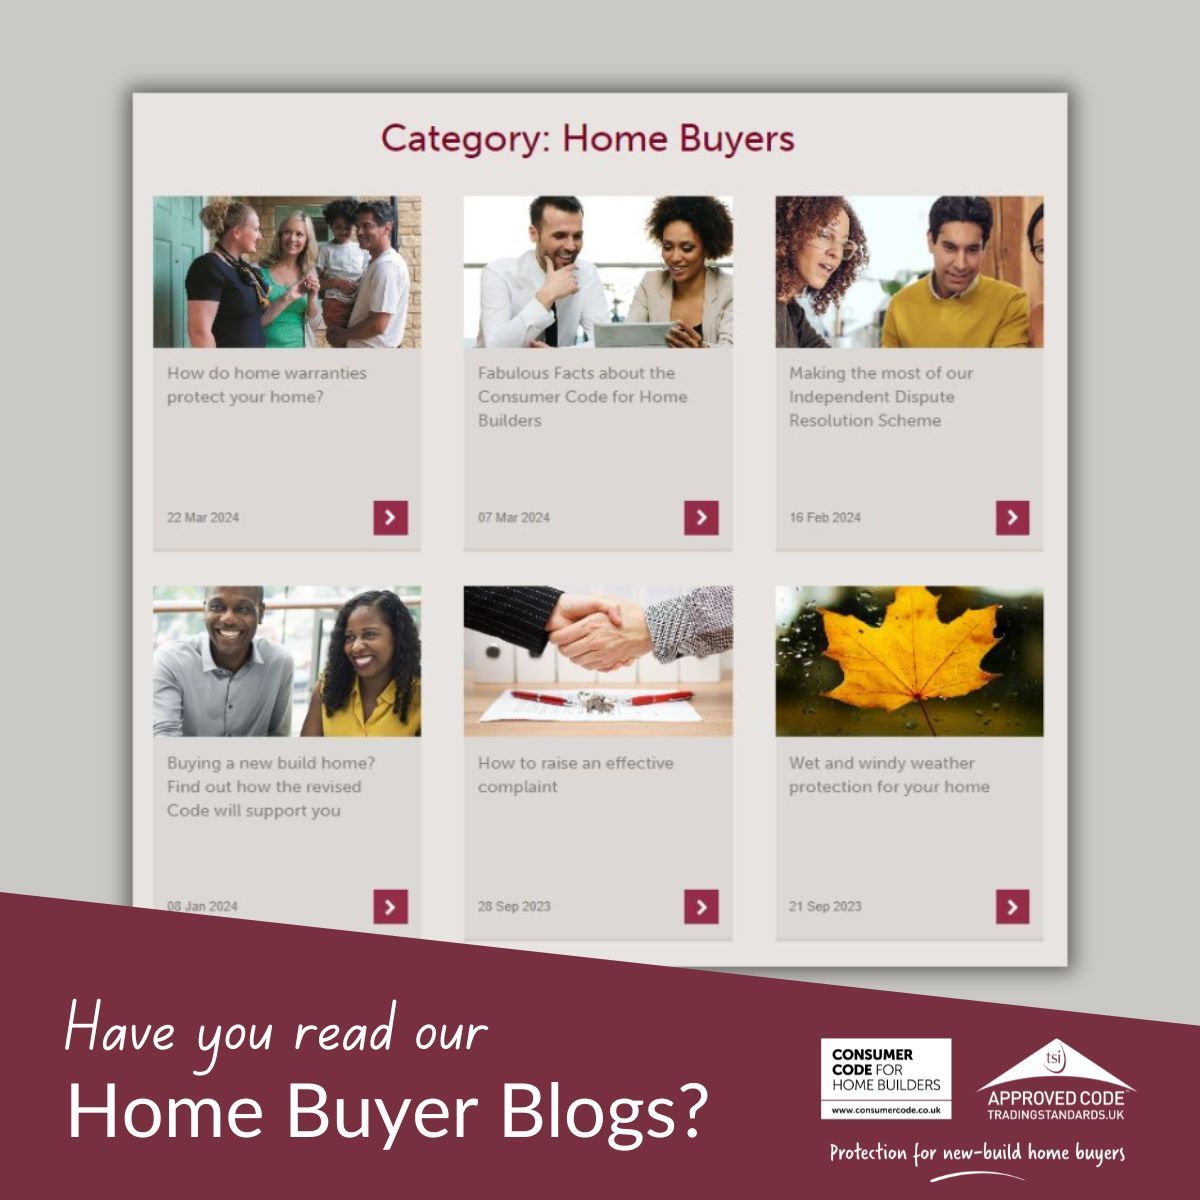 🏡 Buying a new home this spring? Take a look at our home buyer blogs and find out how the Code can support you before, during and after your purchase: 👇 buff.ly/3TOQy3z